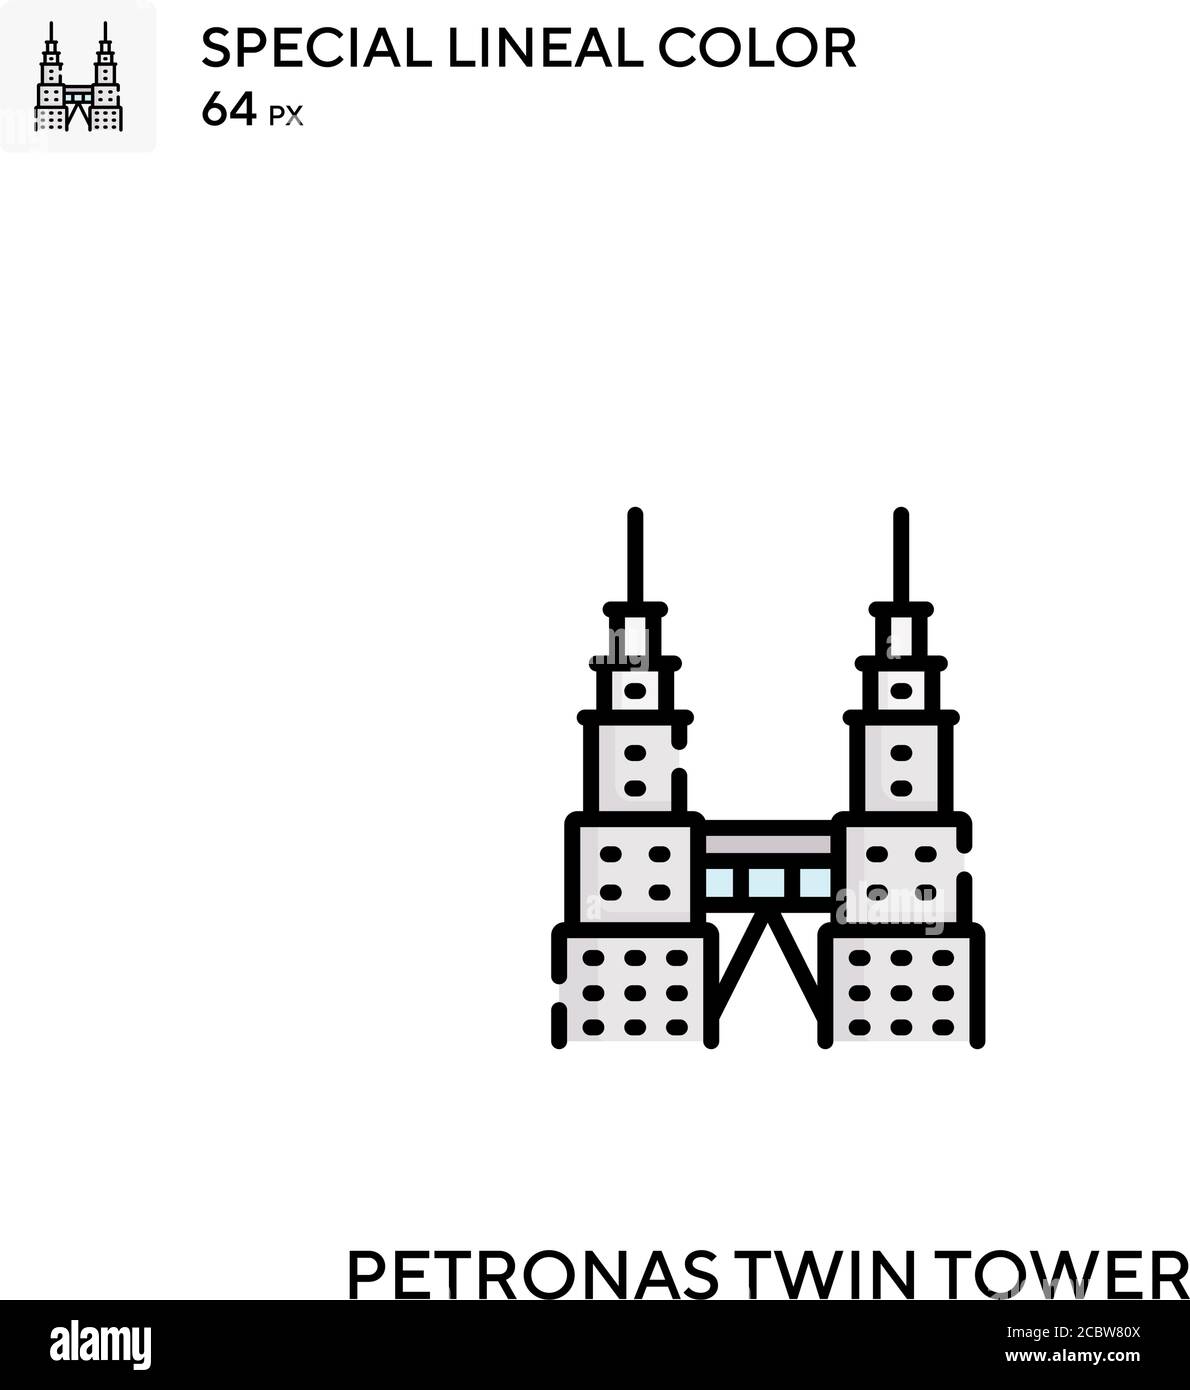 Petronas twin tower Special lineal color vector icon. Petronas twin tower icons for your business project Stock Vector